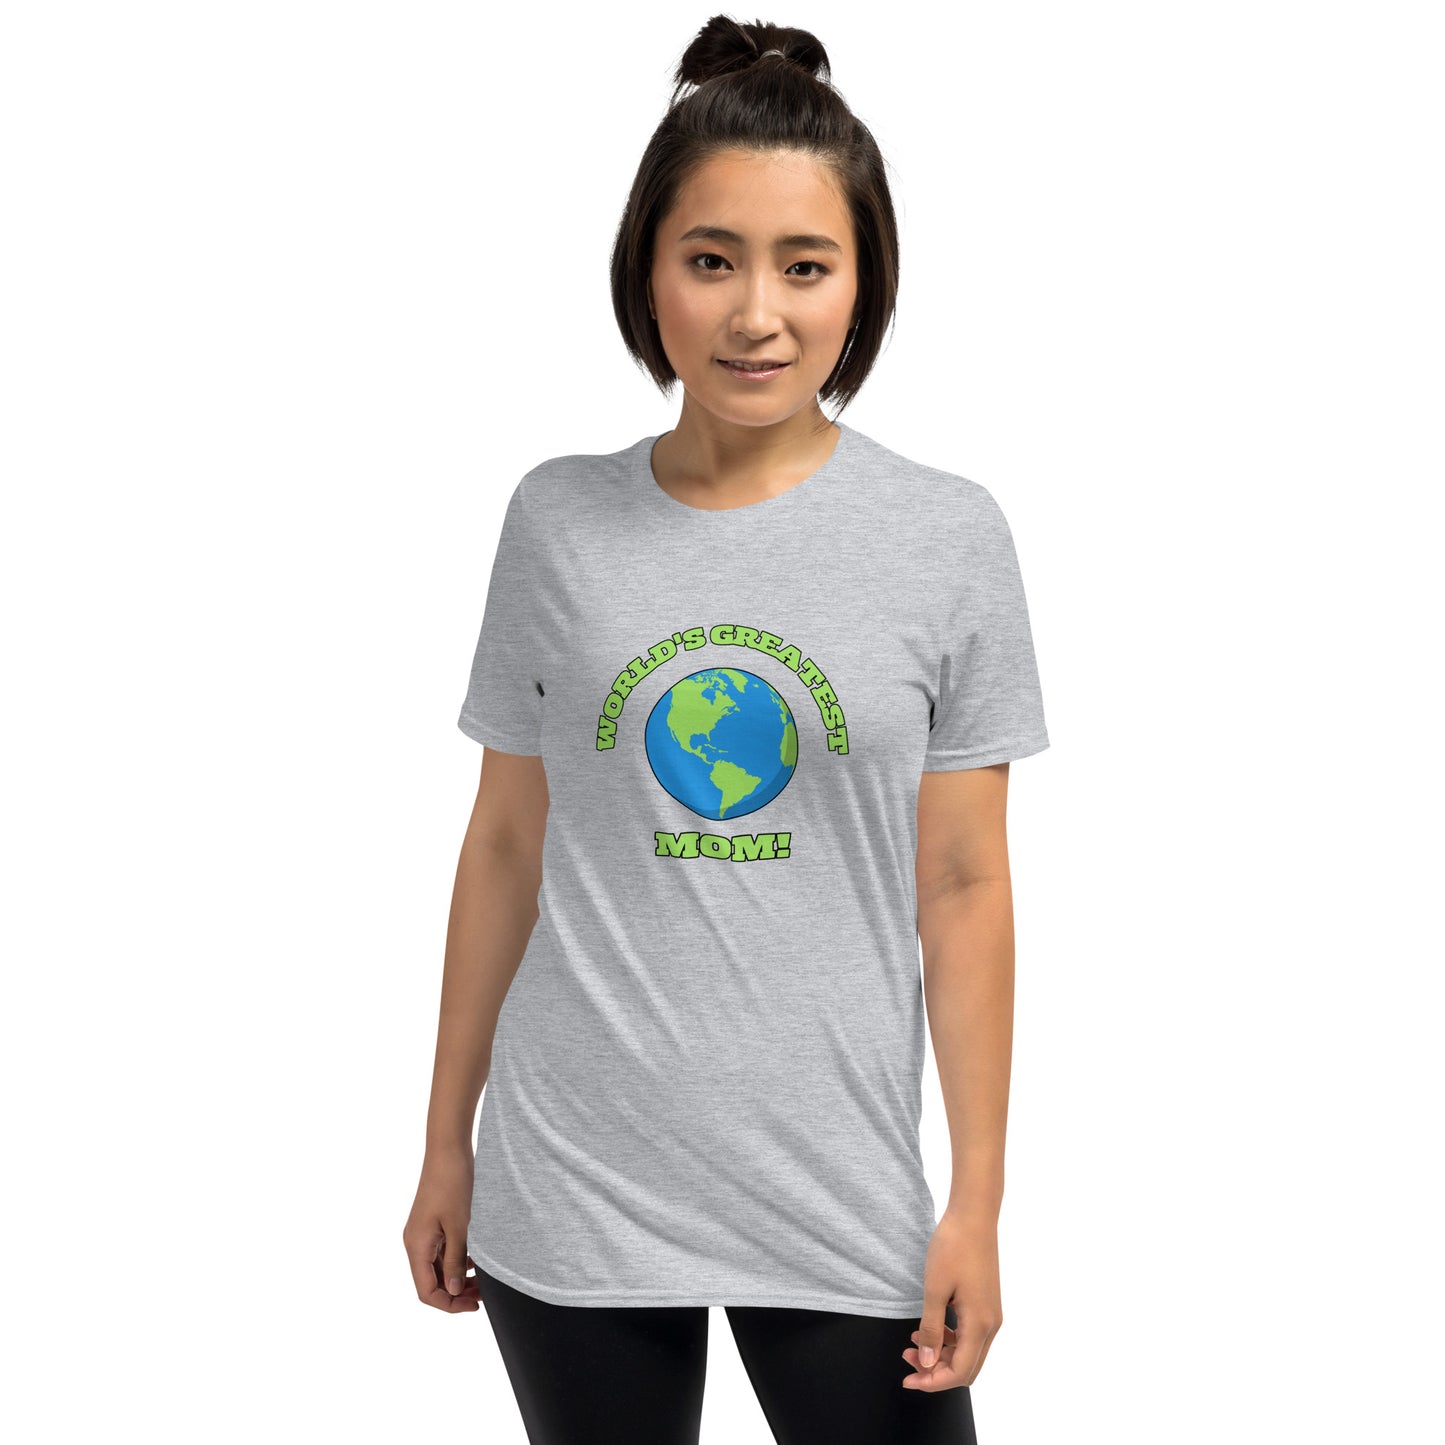 World's Greatest Mom - Short-Sleeve T-Shirt - Great Gift for Mother's Day, Birthdays, or Any Special Day